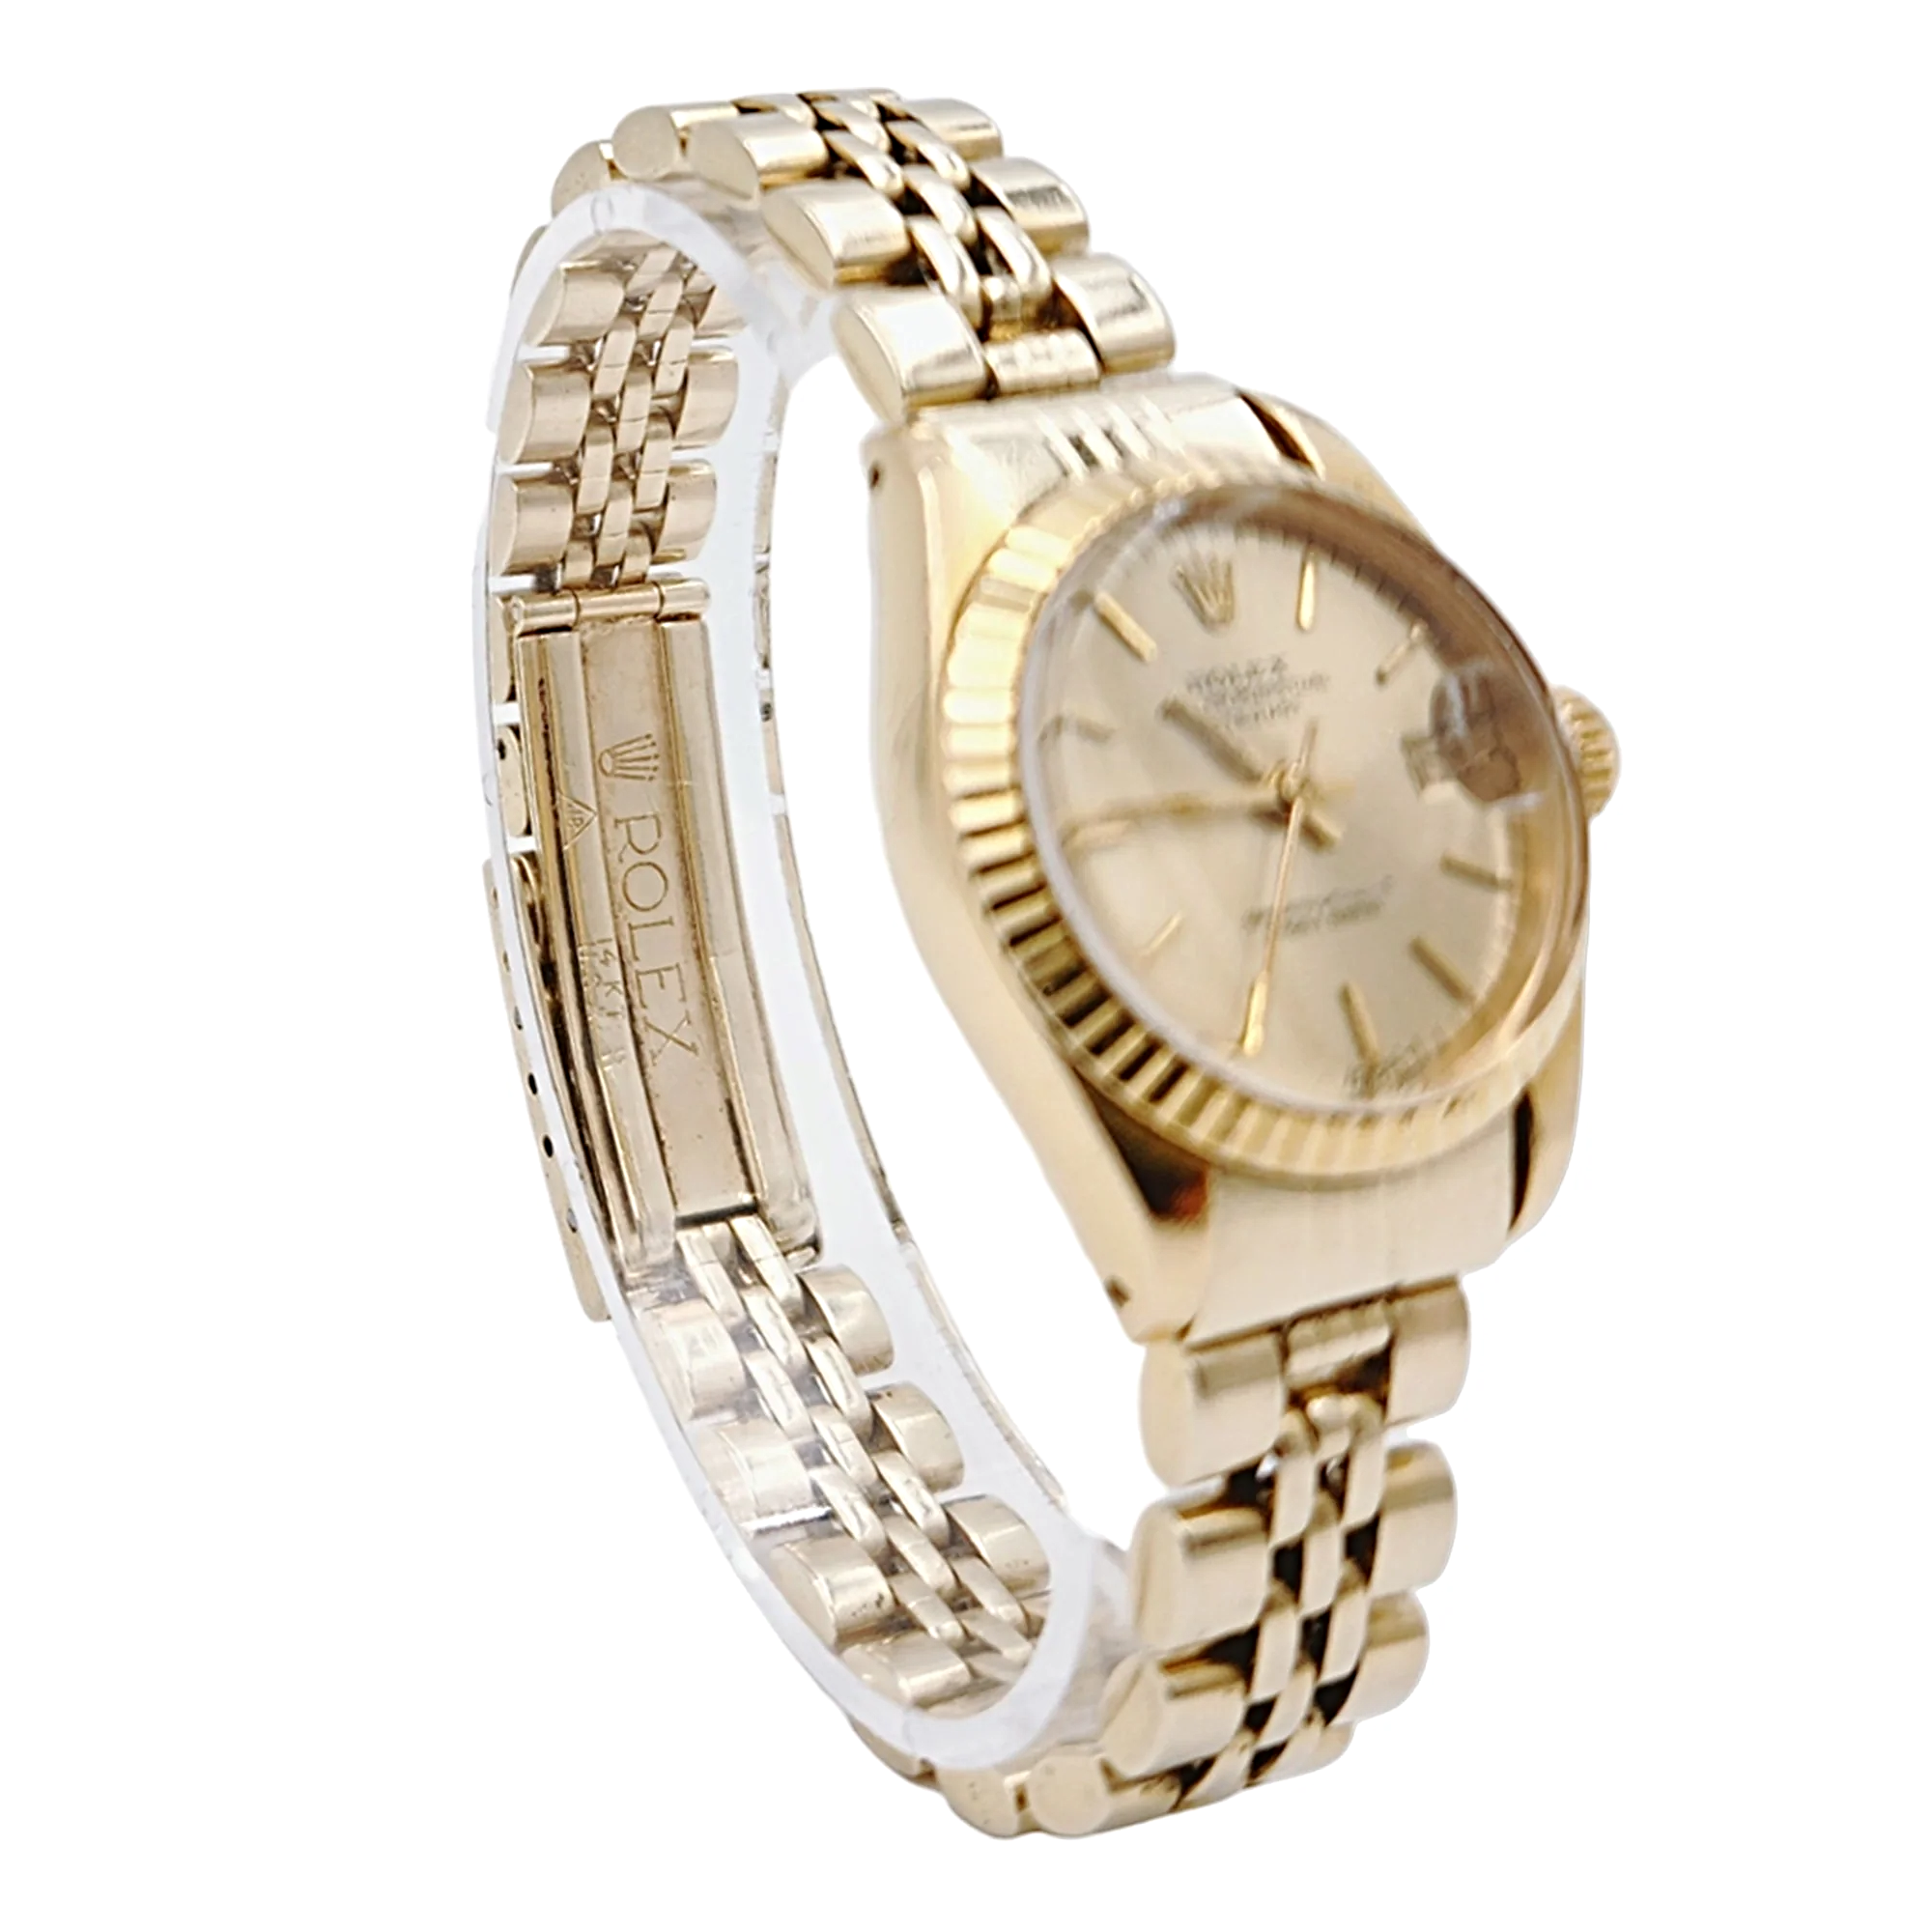 Ladies Rolex DateJust 26mm Vintage Solid 14K Yellow Gold Watch with Champagne Dial and Fluted Bezel. (Pre-Owned 6917)